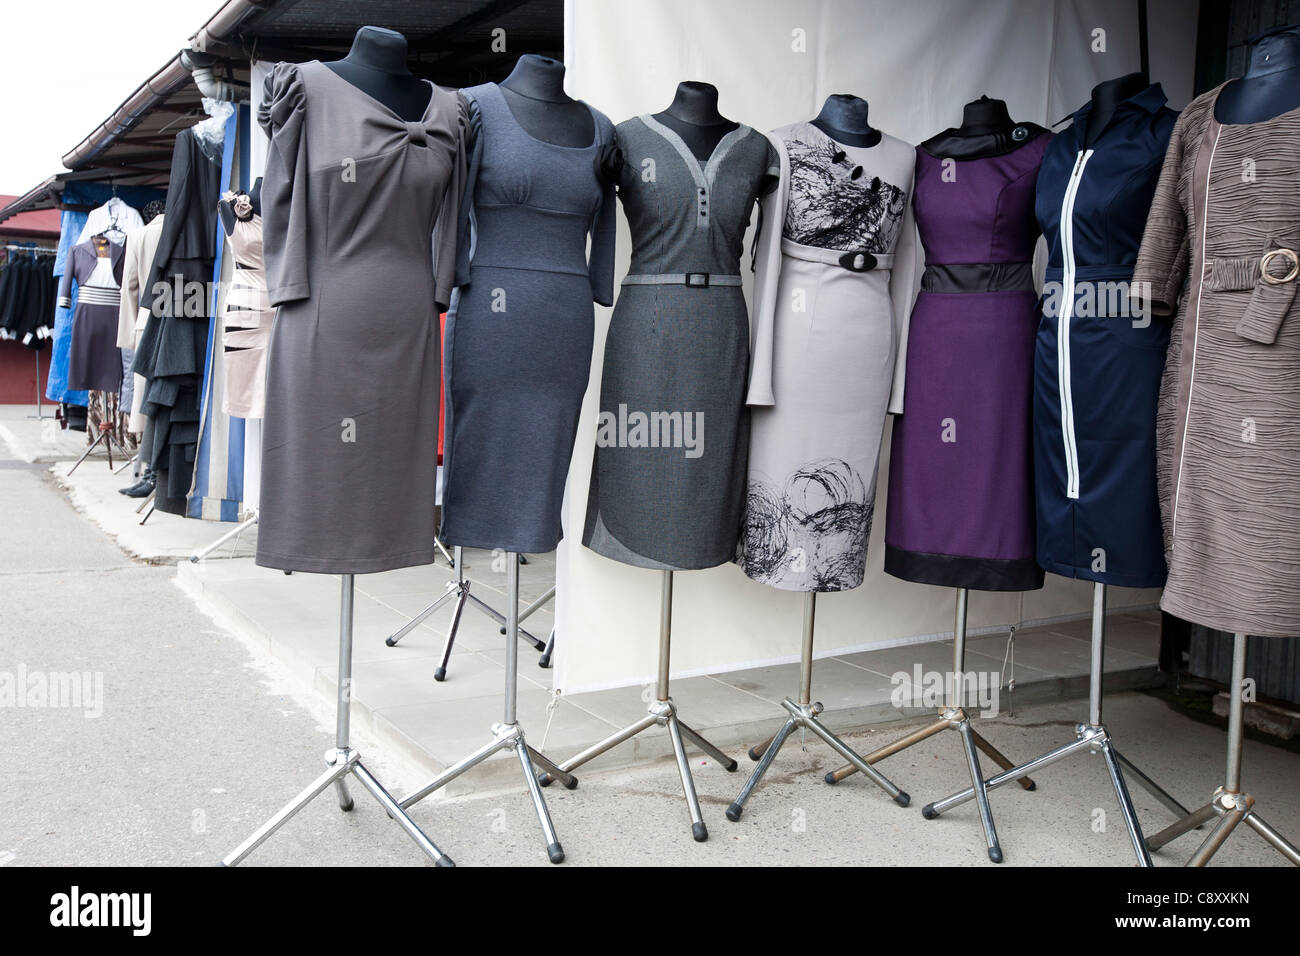 Woman dresses displayed outside stand at the market place in Poland Stock Photo